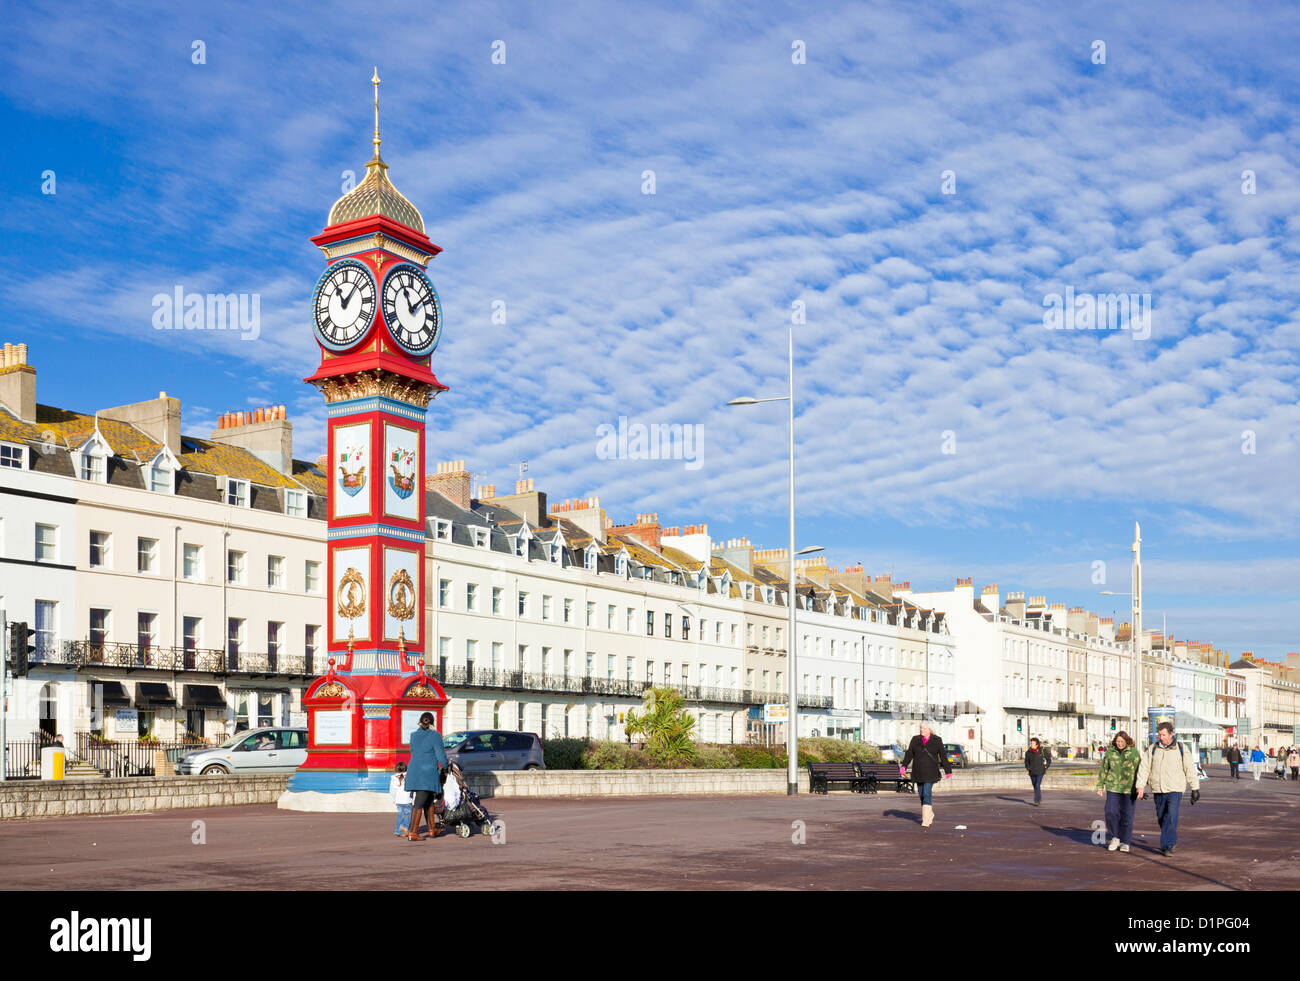 The Jubilee clock was built for the Jubilee of Queen Victoria in 1887 stands on the Esplanade Weymouth Dorset England UK GB Stock Photo